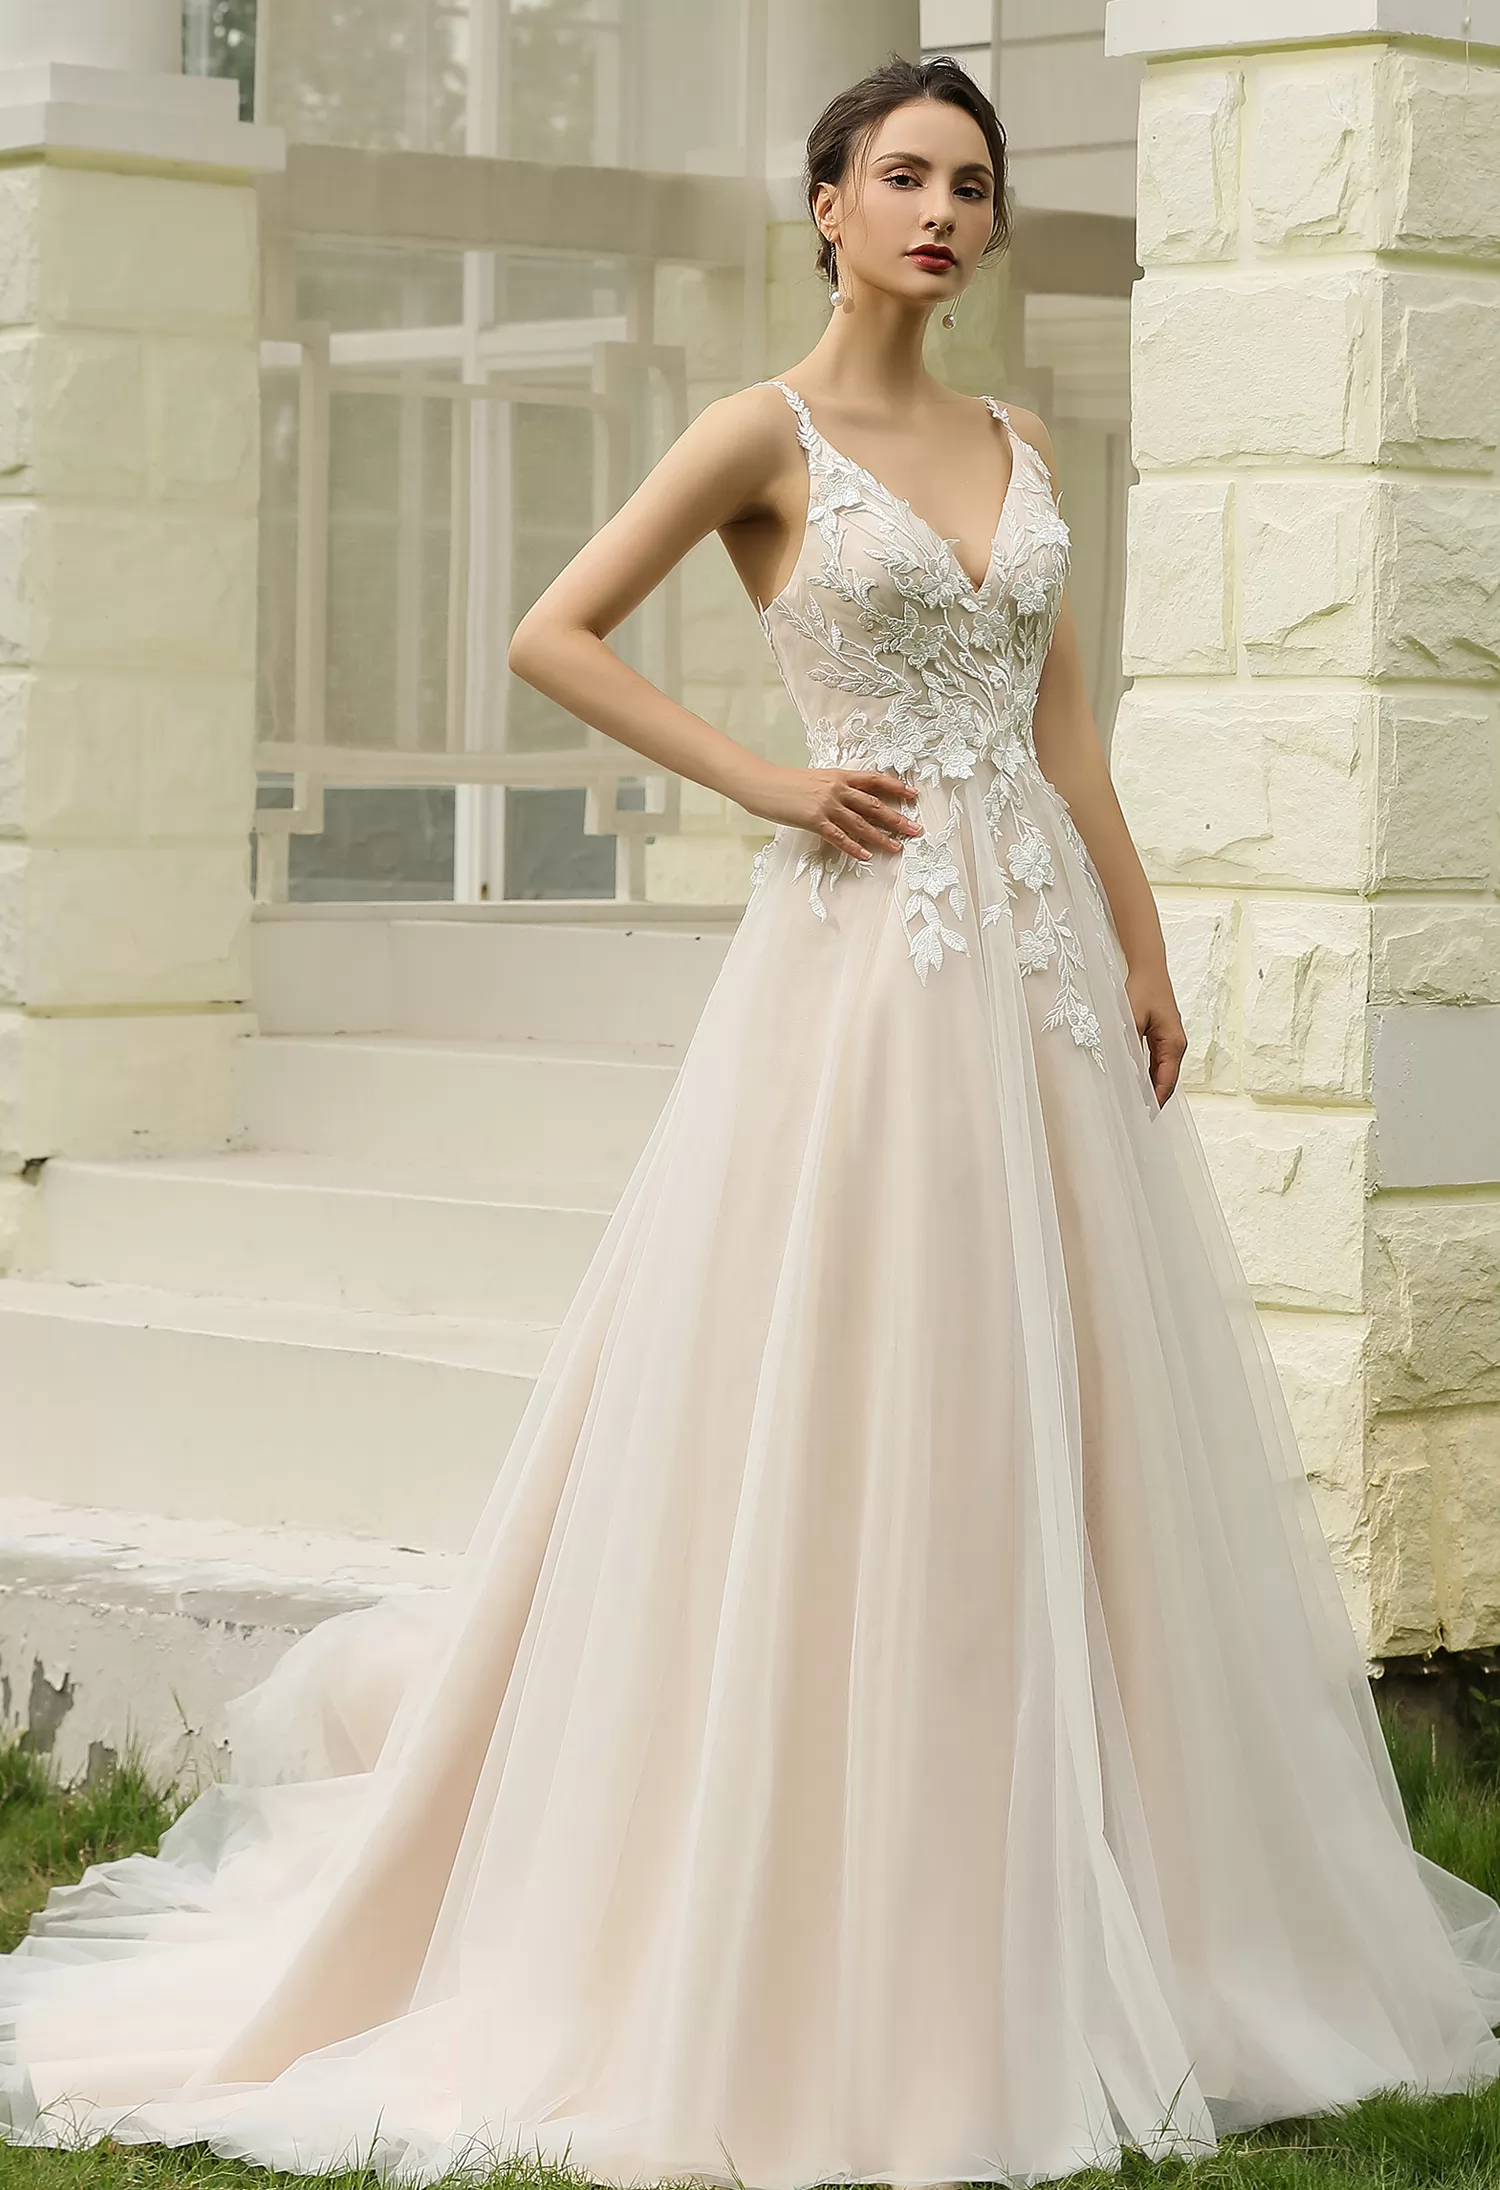 Princess Ballgown with Floral Lace Straps